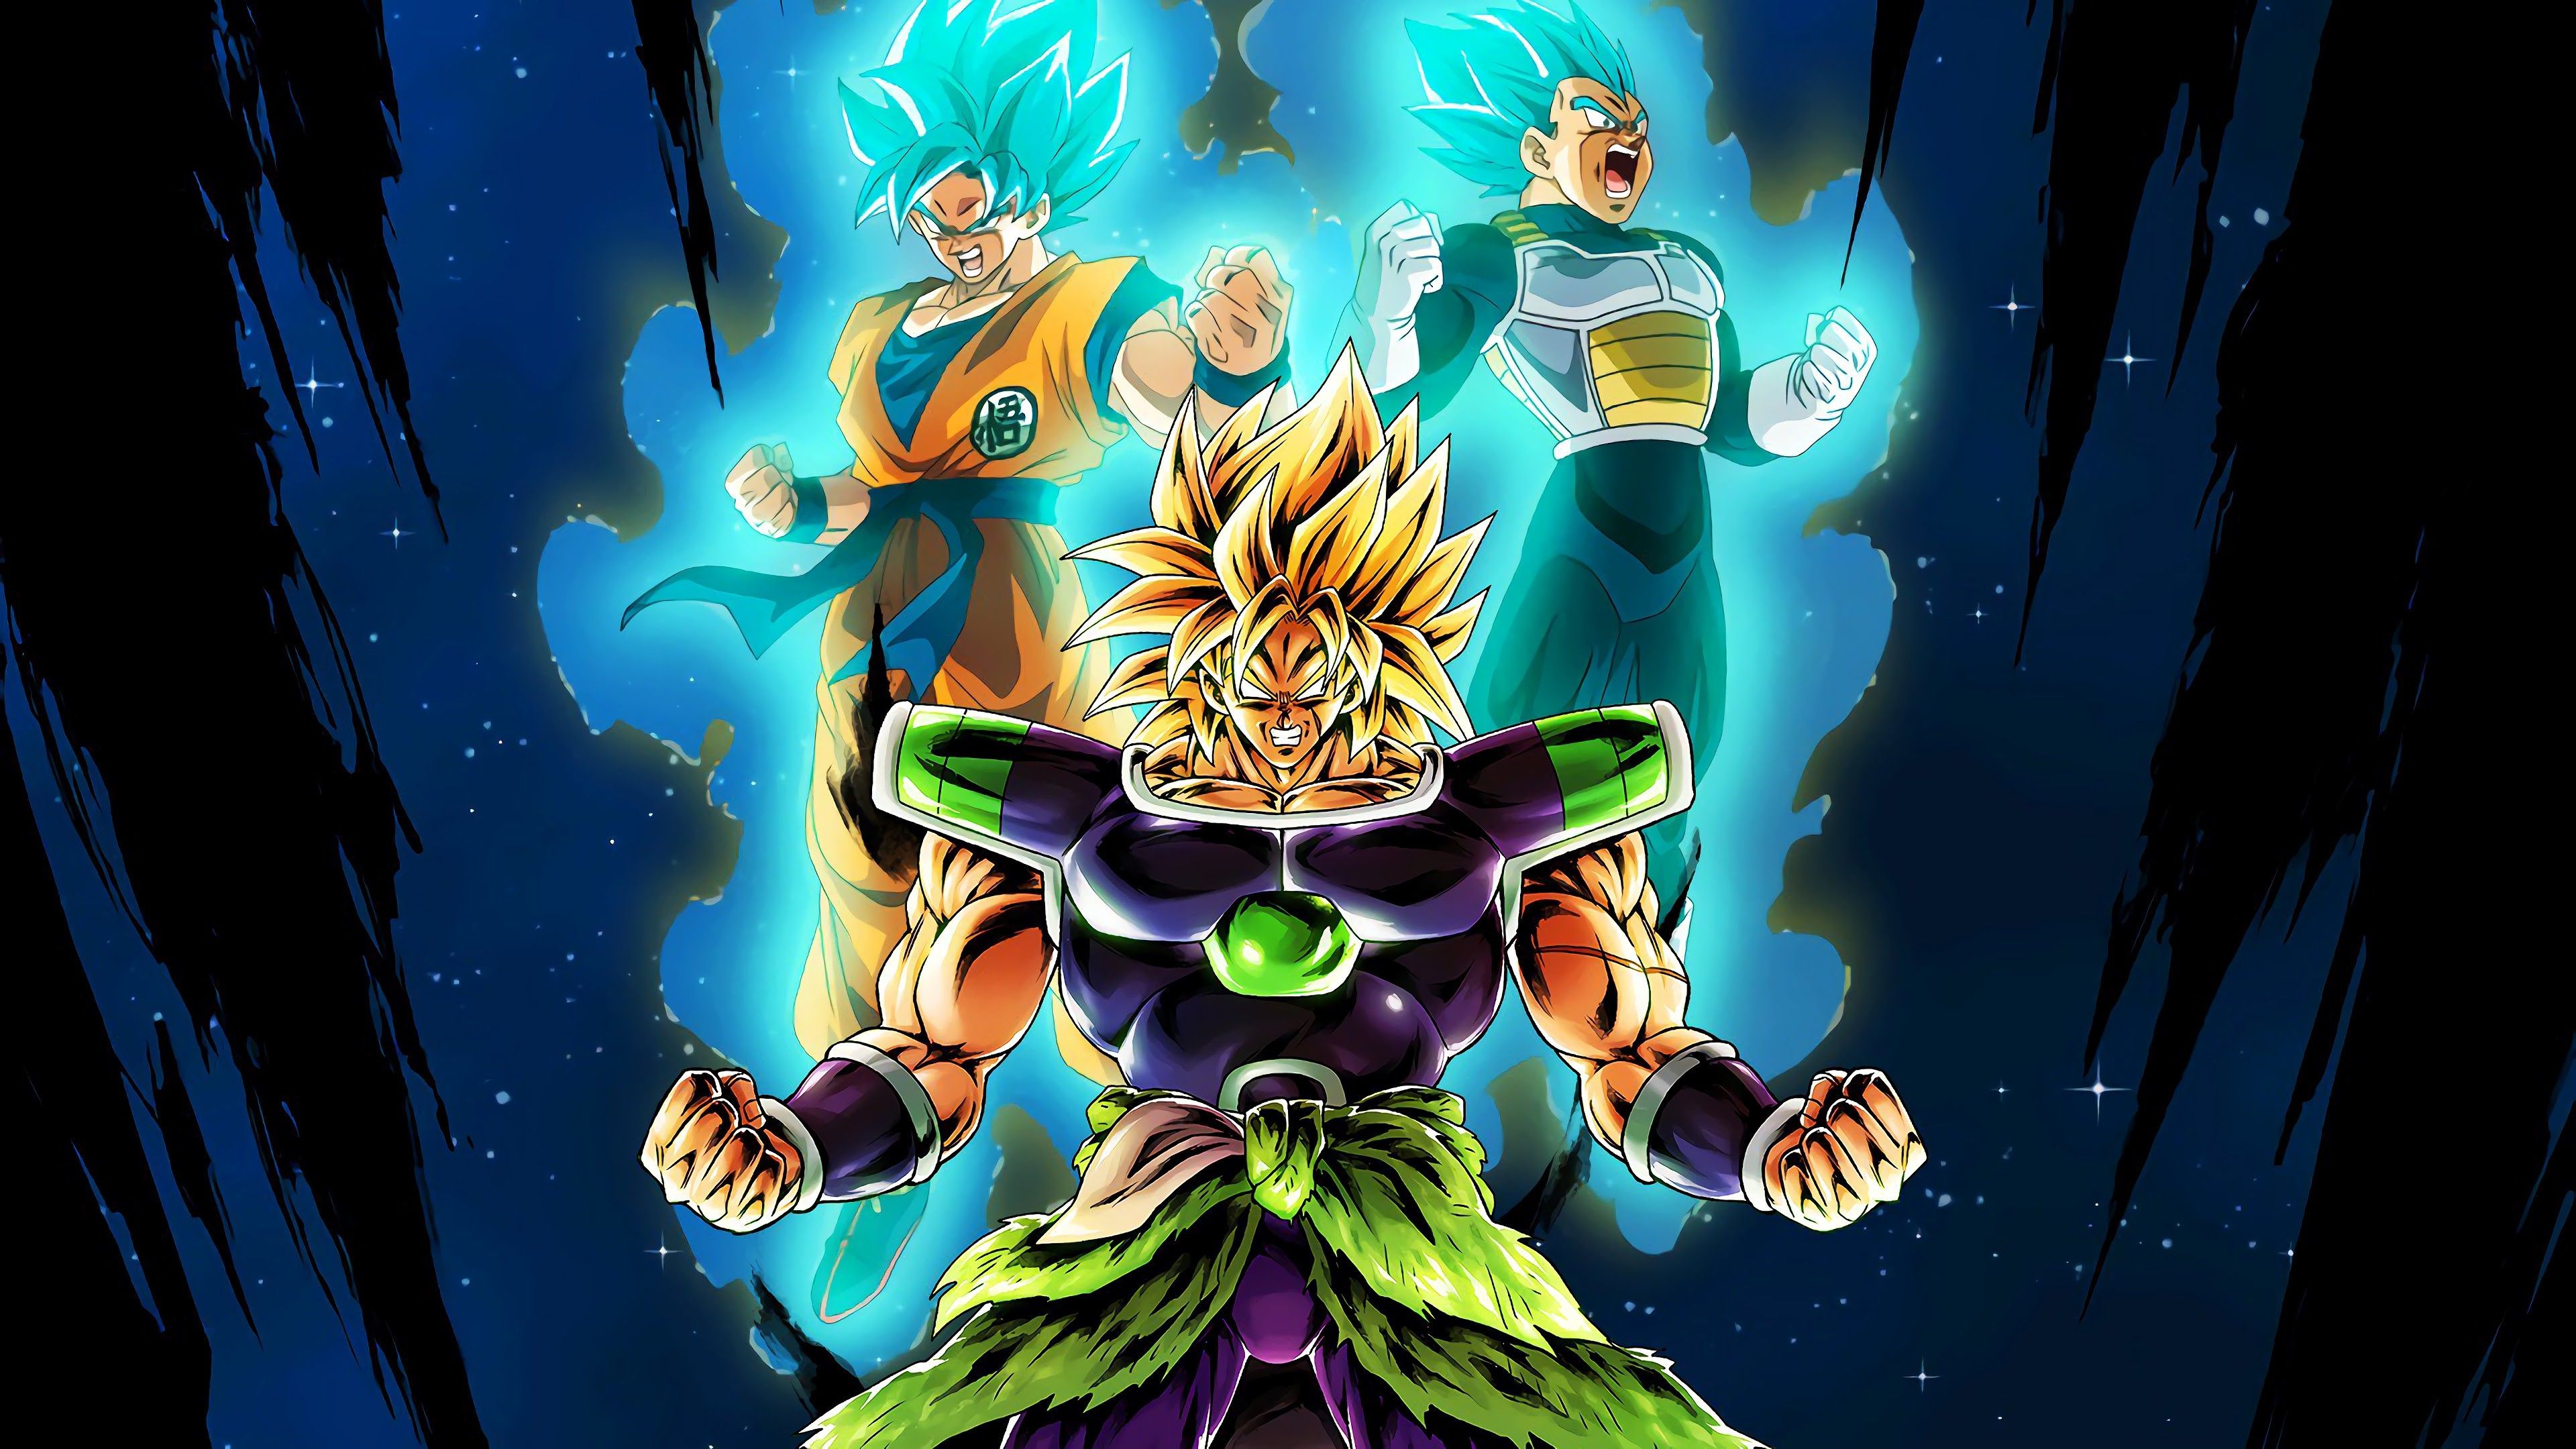 14 Dragon Ball Super Broly Wallpaper 4k Android Pictures Anime Hd ...